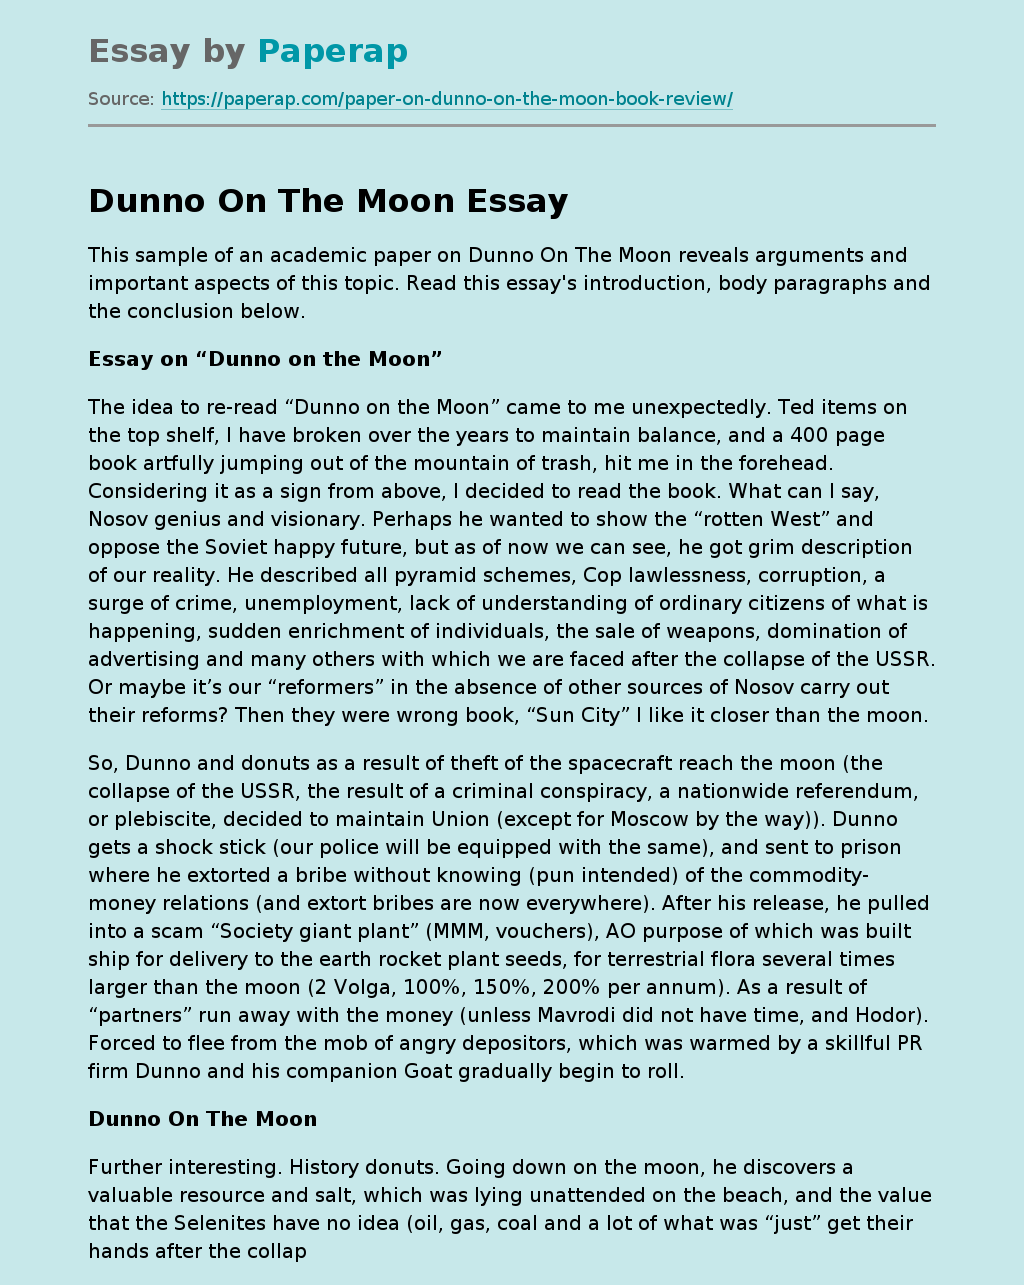 Essay on Dunno on the Moon